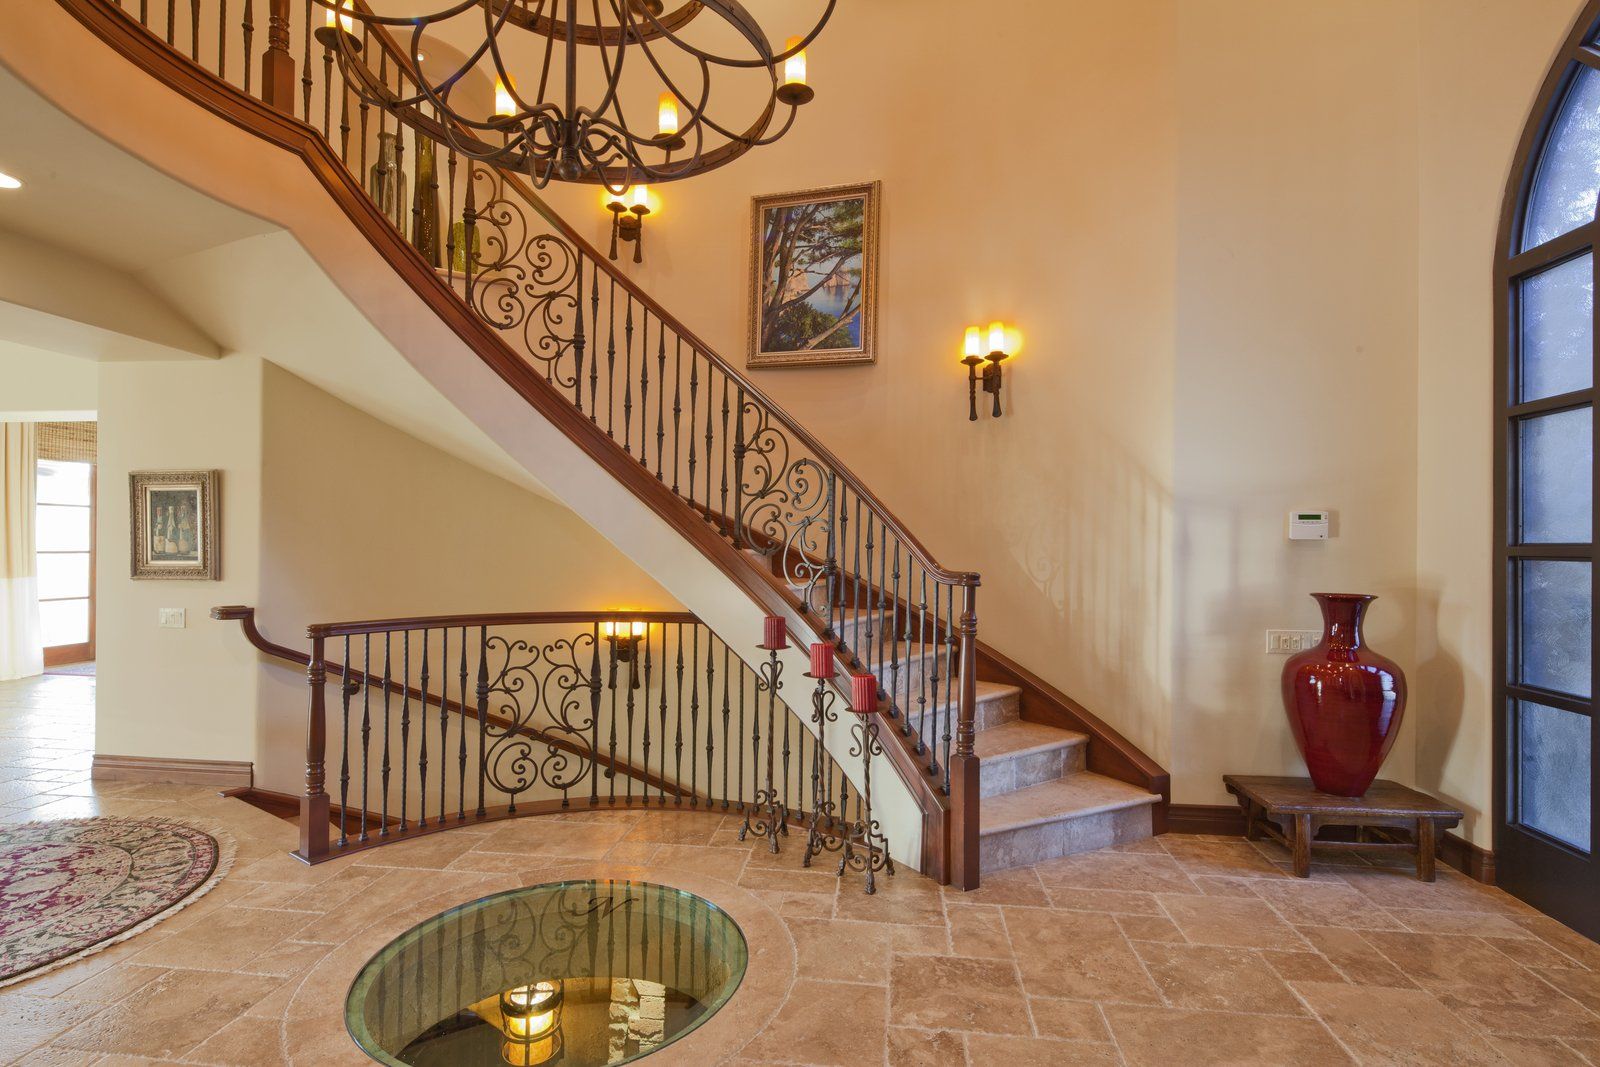 a fancy customized railings and custom stairs